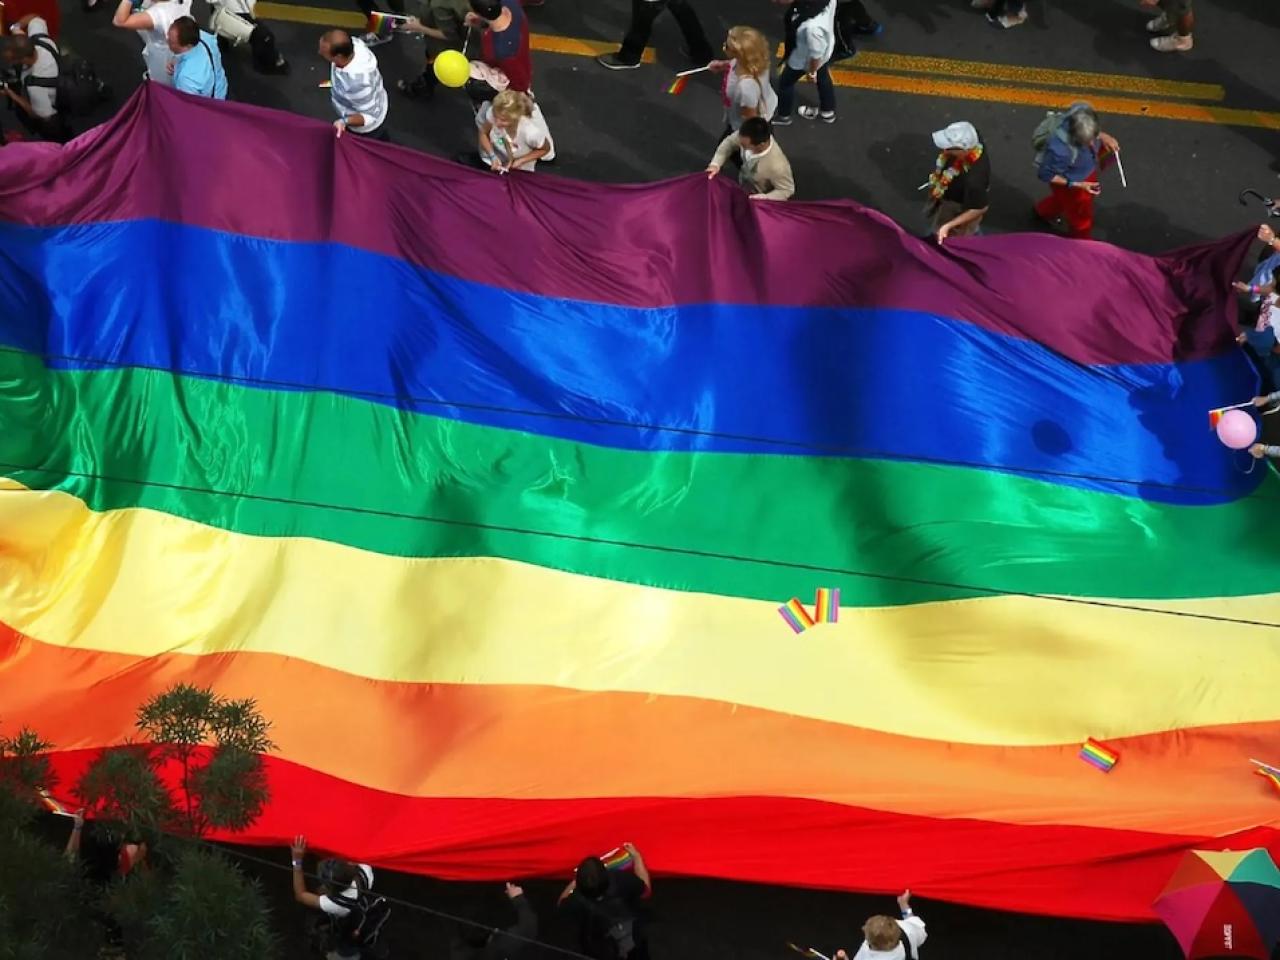 Pride Flag shown from above at a parade.